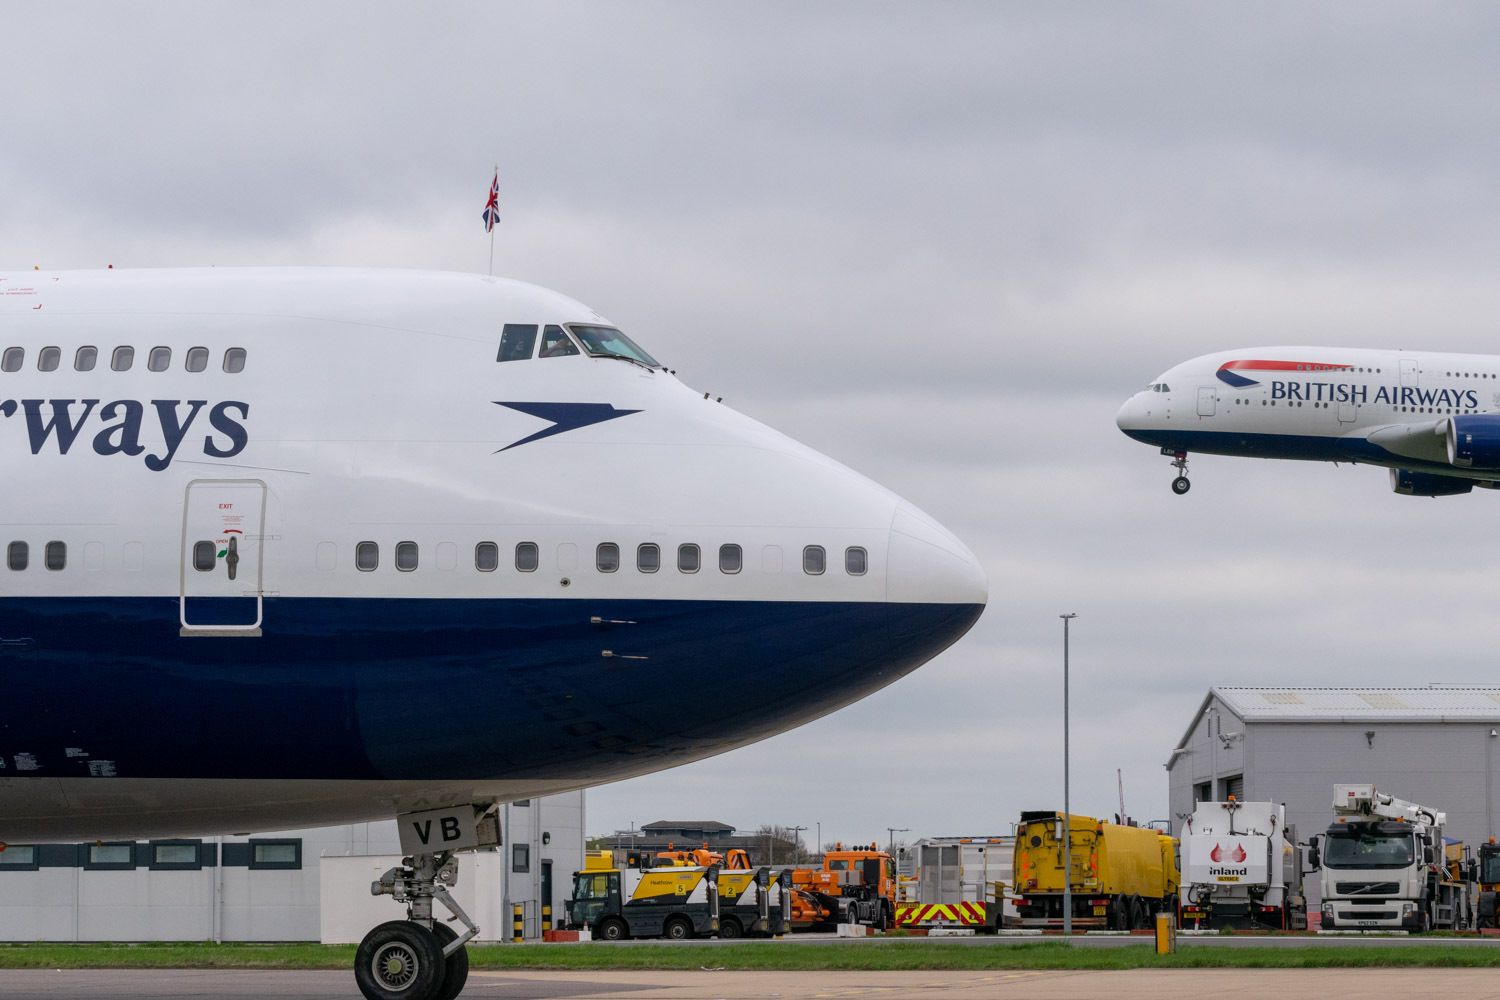 British Airways Boeing 747 taxiing with a British Airways A380 landing in the background.